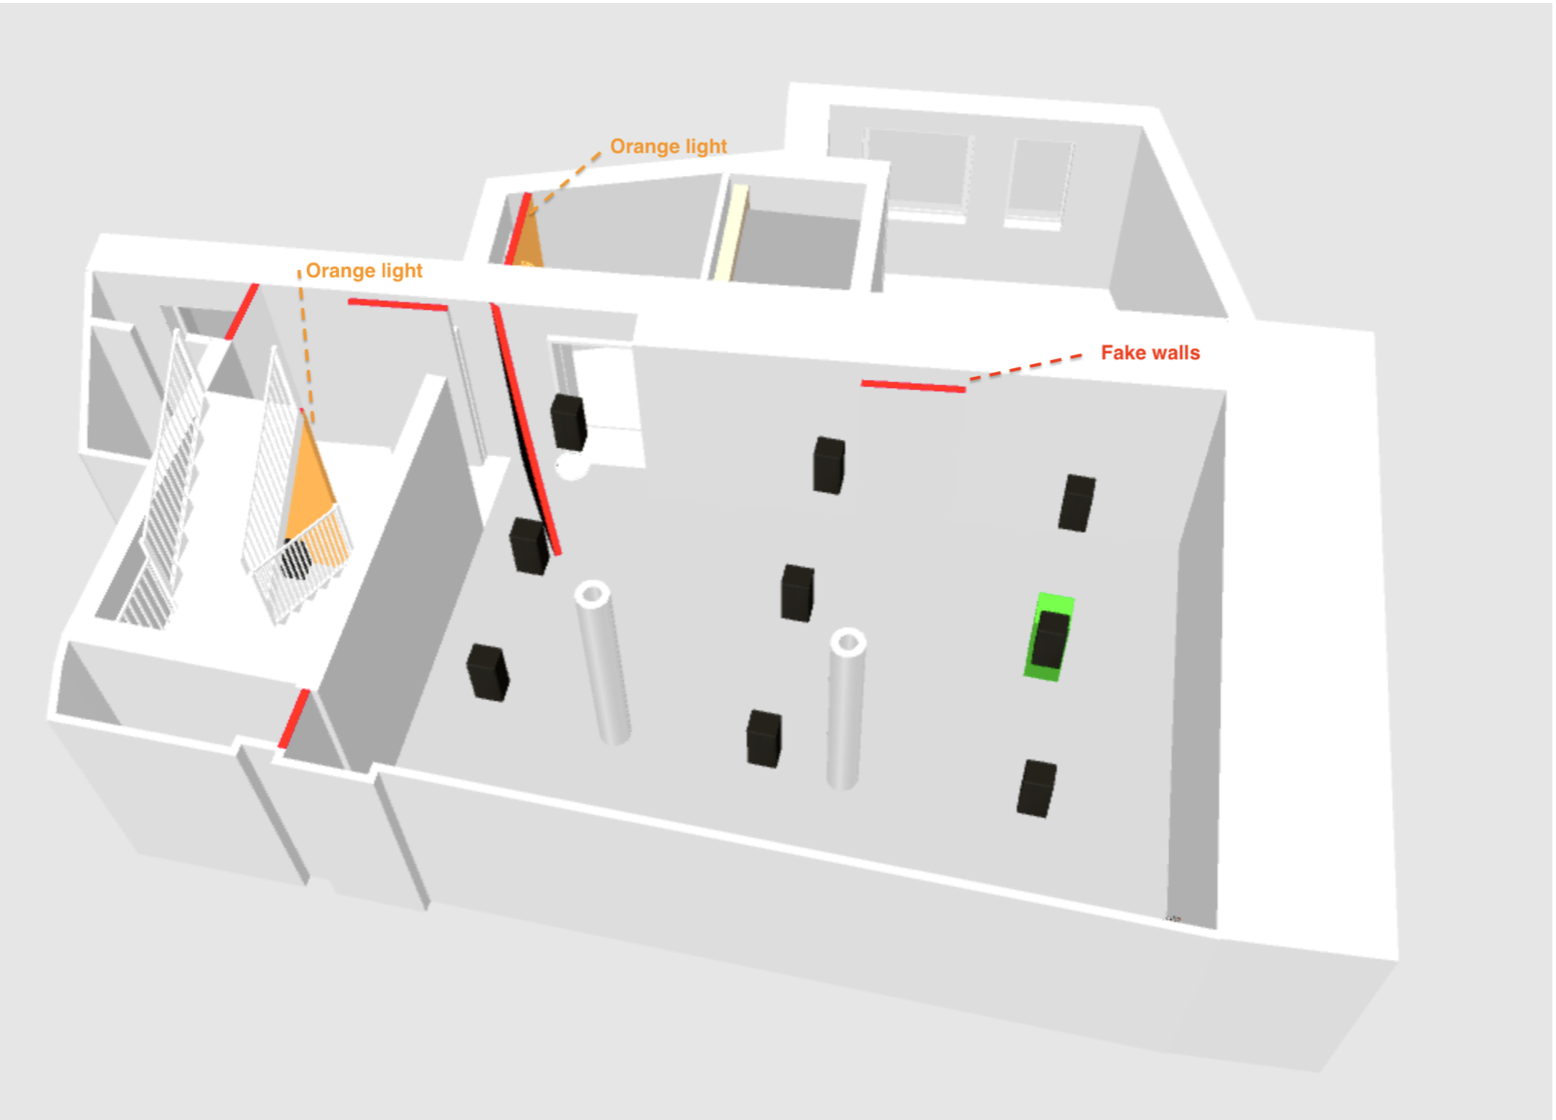 Intervention in space. Removal of architectural elements. False walls (red), Orange lights in preliminary rooms (orange).